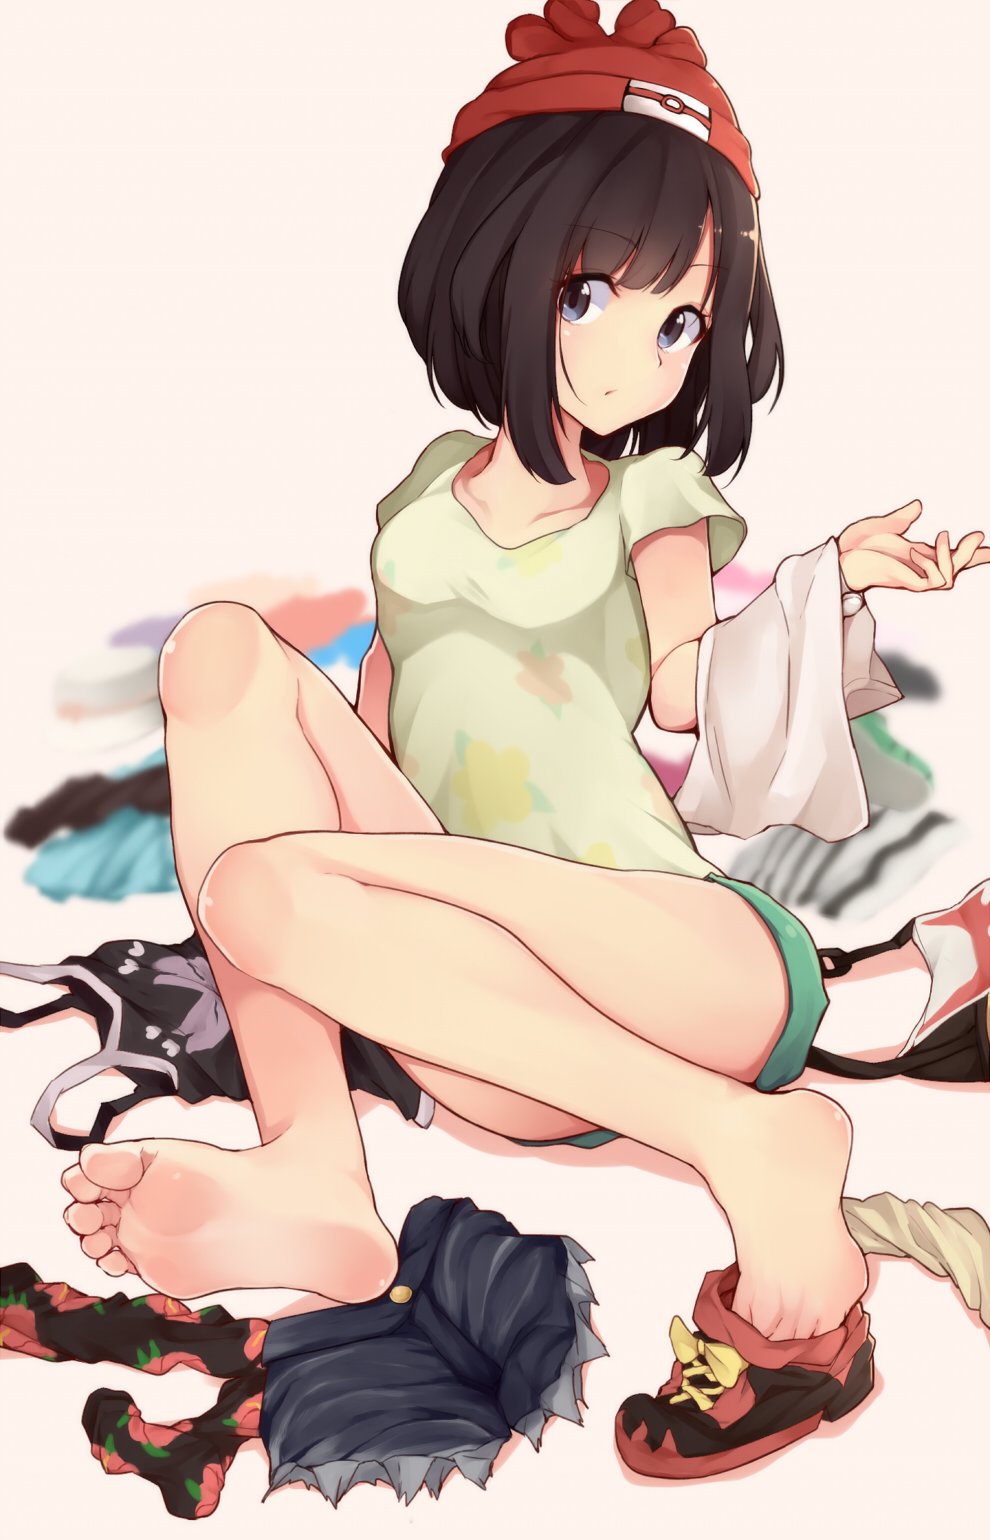 1girl bangs barefoot batatata77 black_hair blue_hair blurry_background clothes clothes_removed feet female_protagonist_(pokemon_sm) floral_print green_shorts hat highres looking_at_viewer pokemon pokemon_(game) pokemon_sm sandals shoes_removed short_hair shorts single_shoe socks soles solo toes white_background